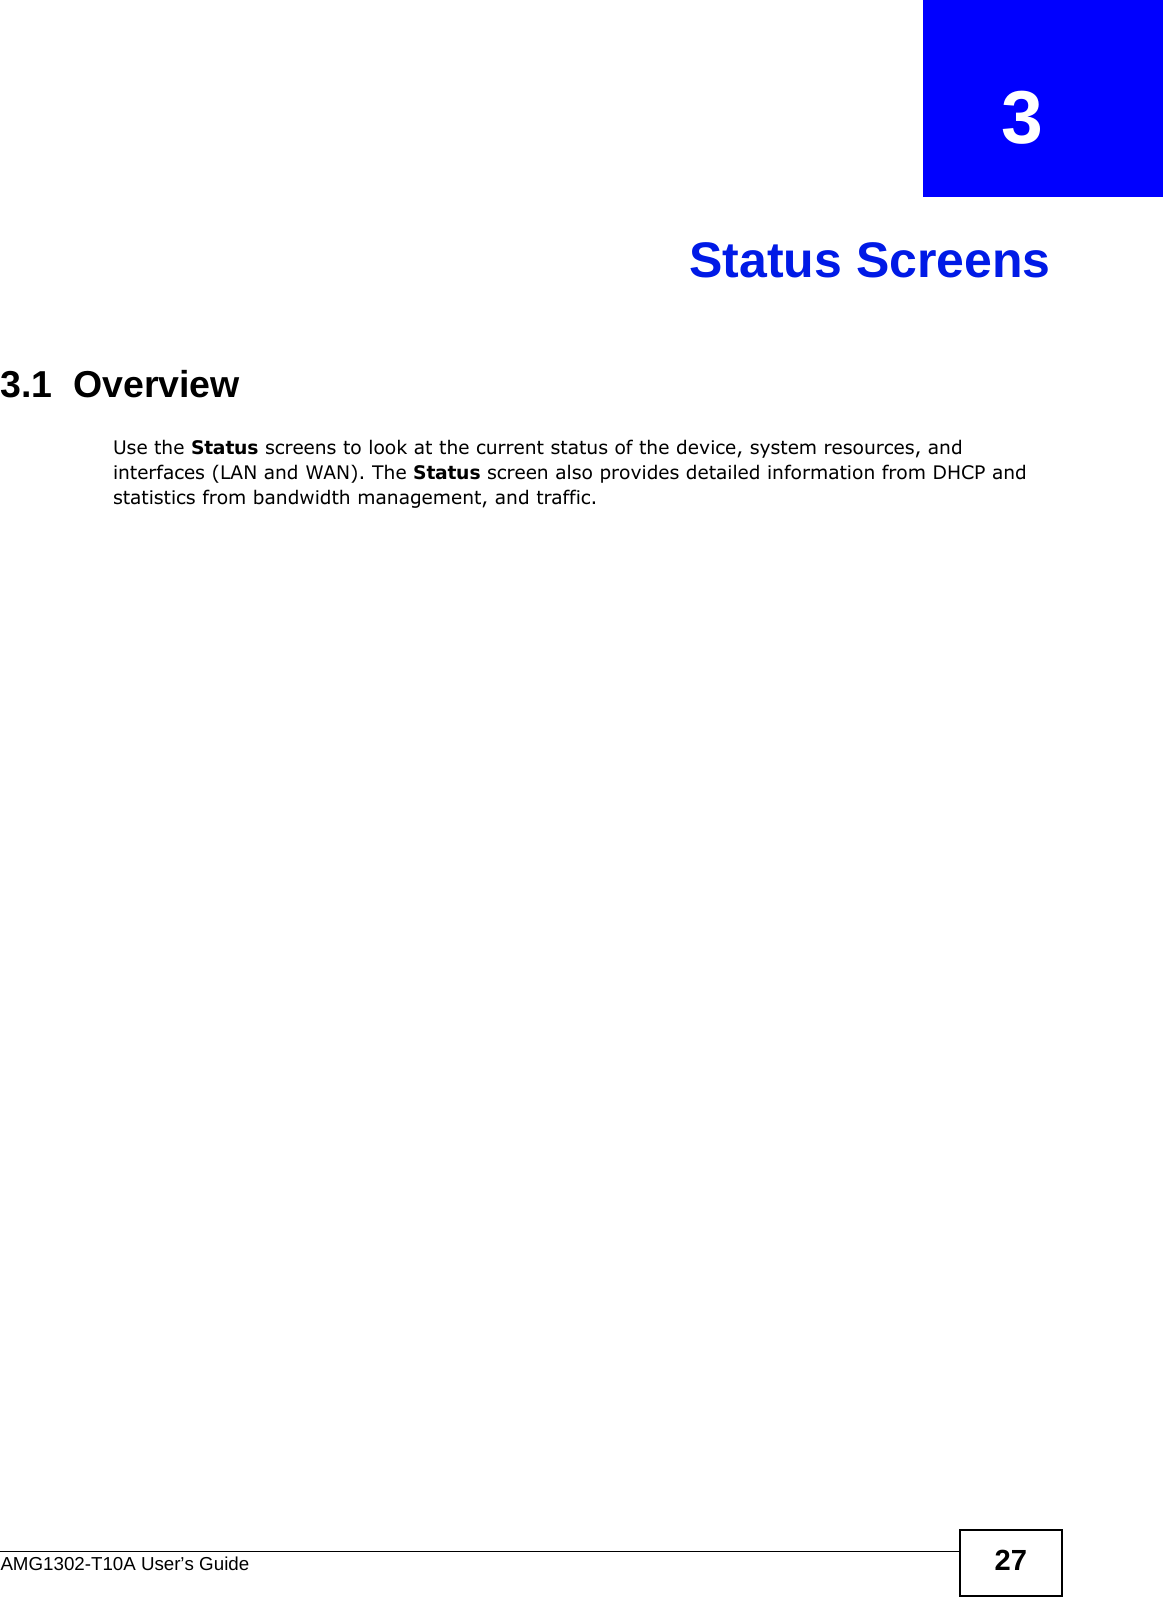 AMG1302-T10A User’s Guide 27CHAPTER   3Status Screens3.1  OverviewUse the Status screens to look at the current status of the device, system resources, and interfaces (LAN and WAN). The Status screen also provides detailed information from DHCP and statistics from bandwidth management, and traffic.